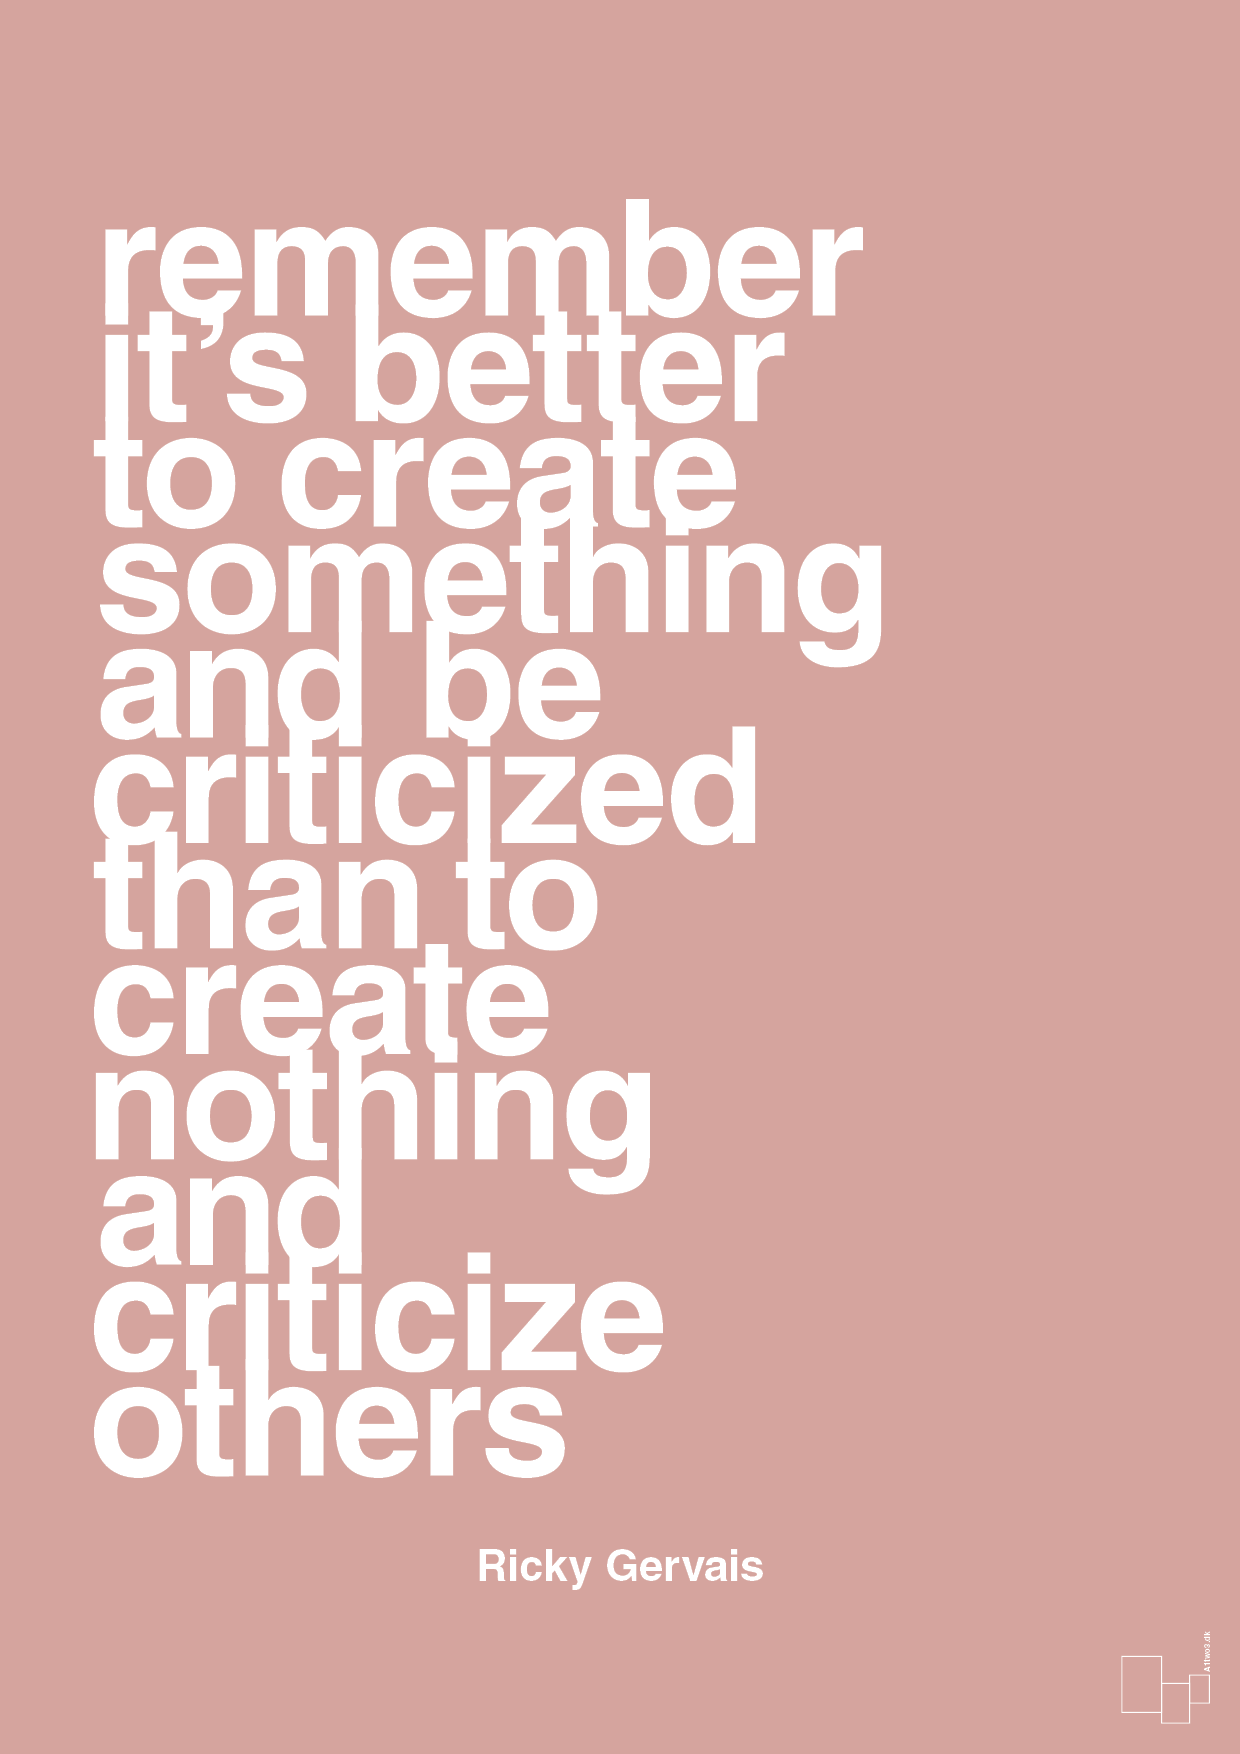 remember its better to create something and be criticized than create nothing and criticize others - Plakat med Citater i Bubble Shell